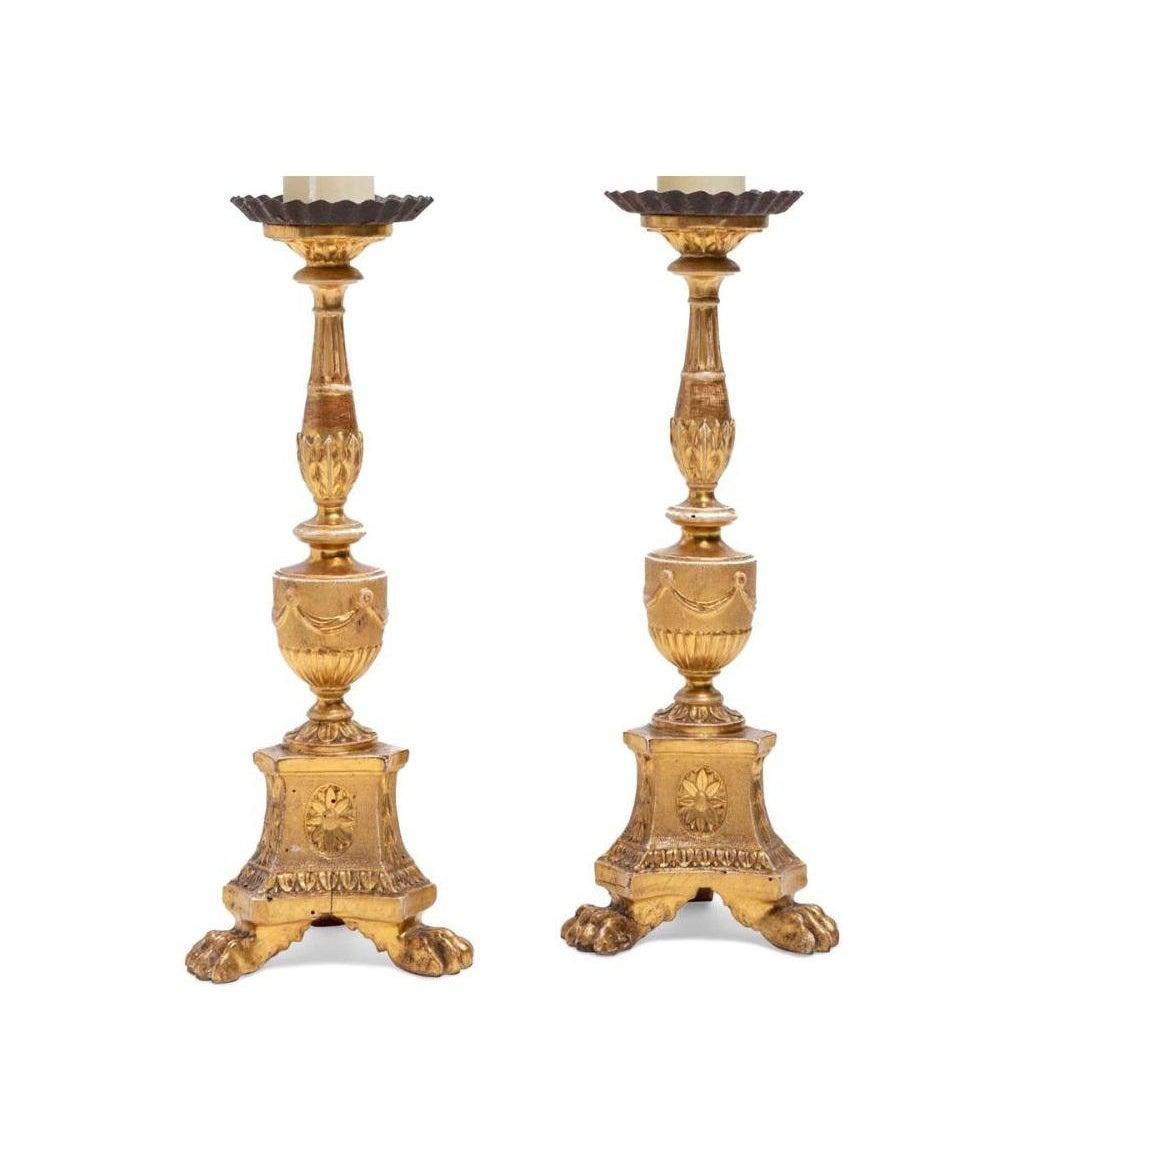 French Antique 18th Century Continental Neoclassical Giltwood Pricket Candlesticks